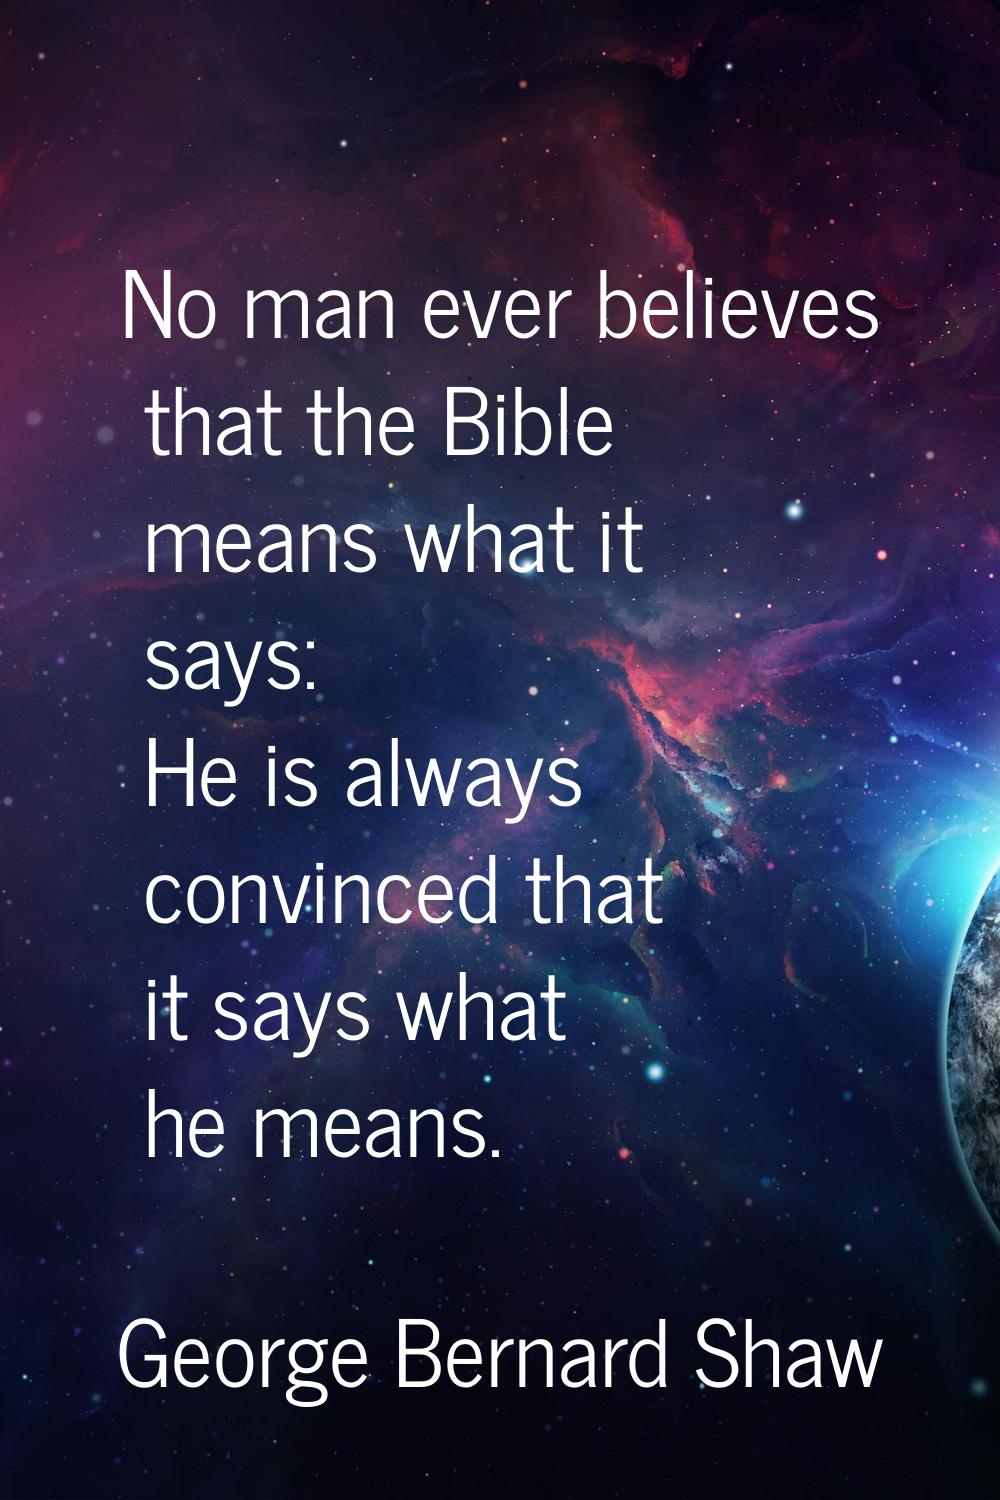 No man ever believes that the Bible means what it says: He is always convinced that it says what he